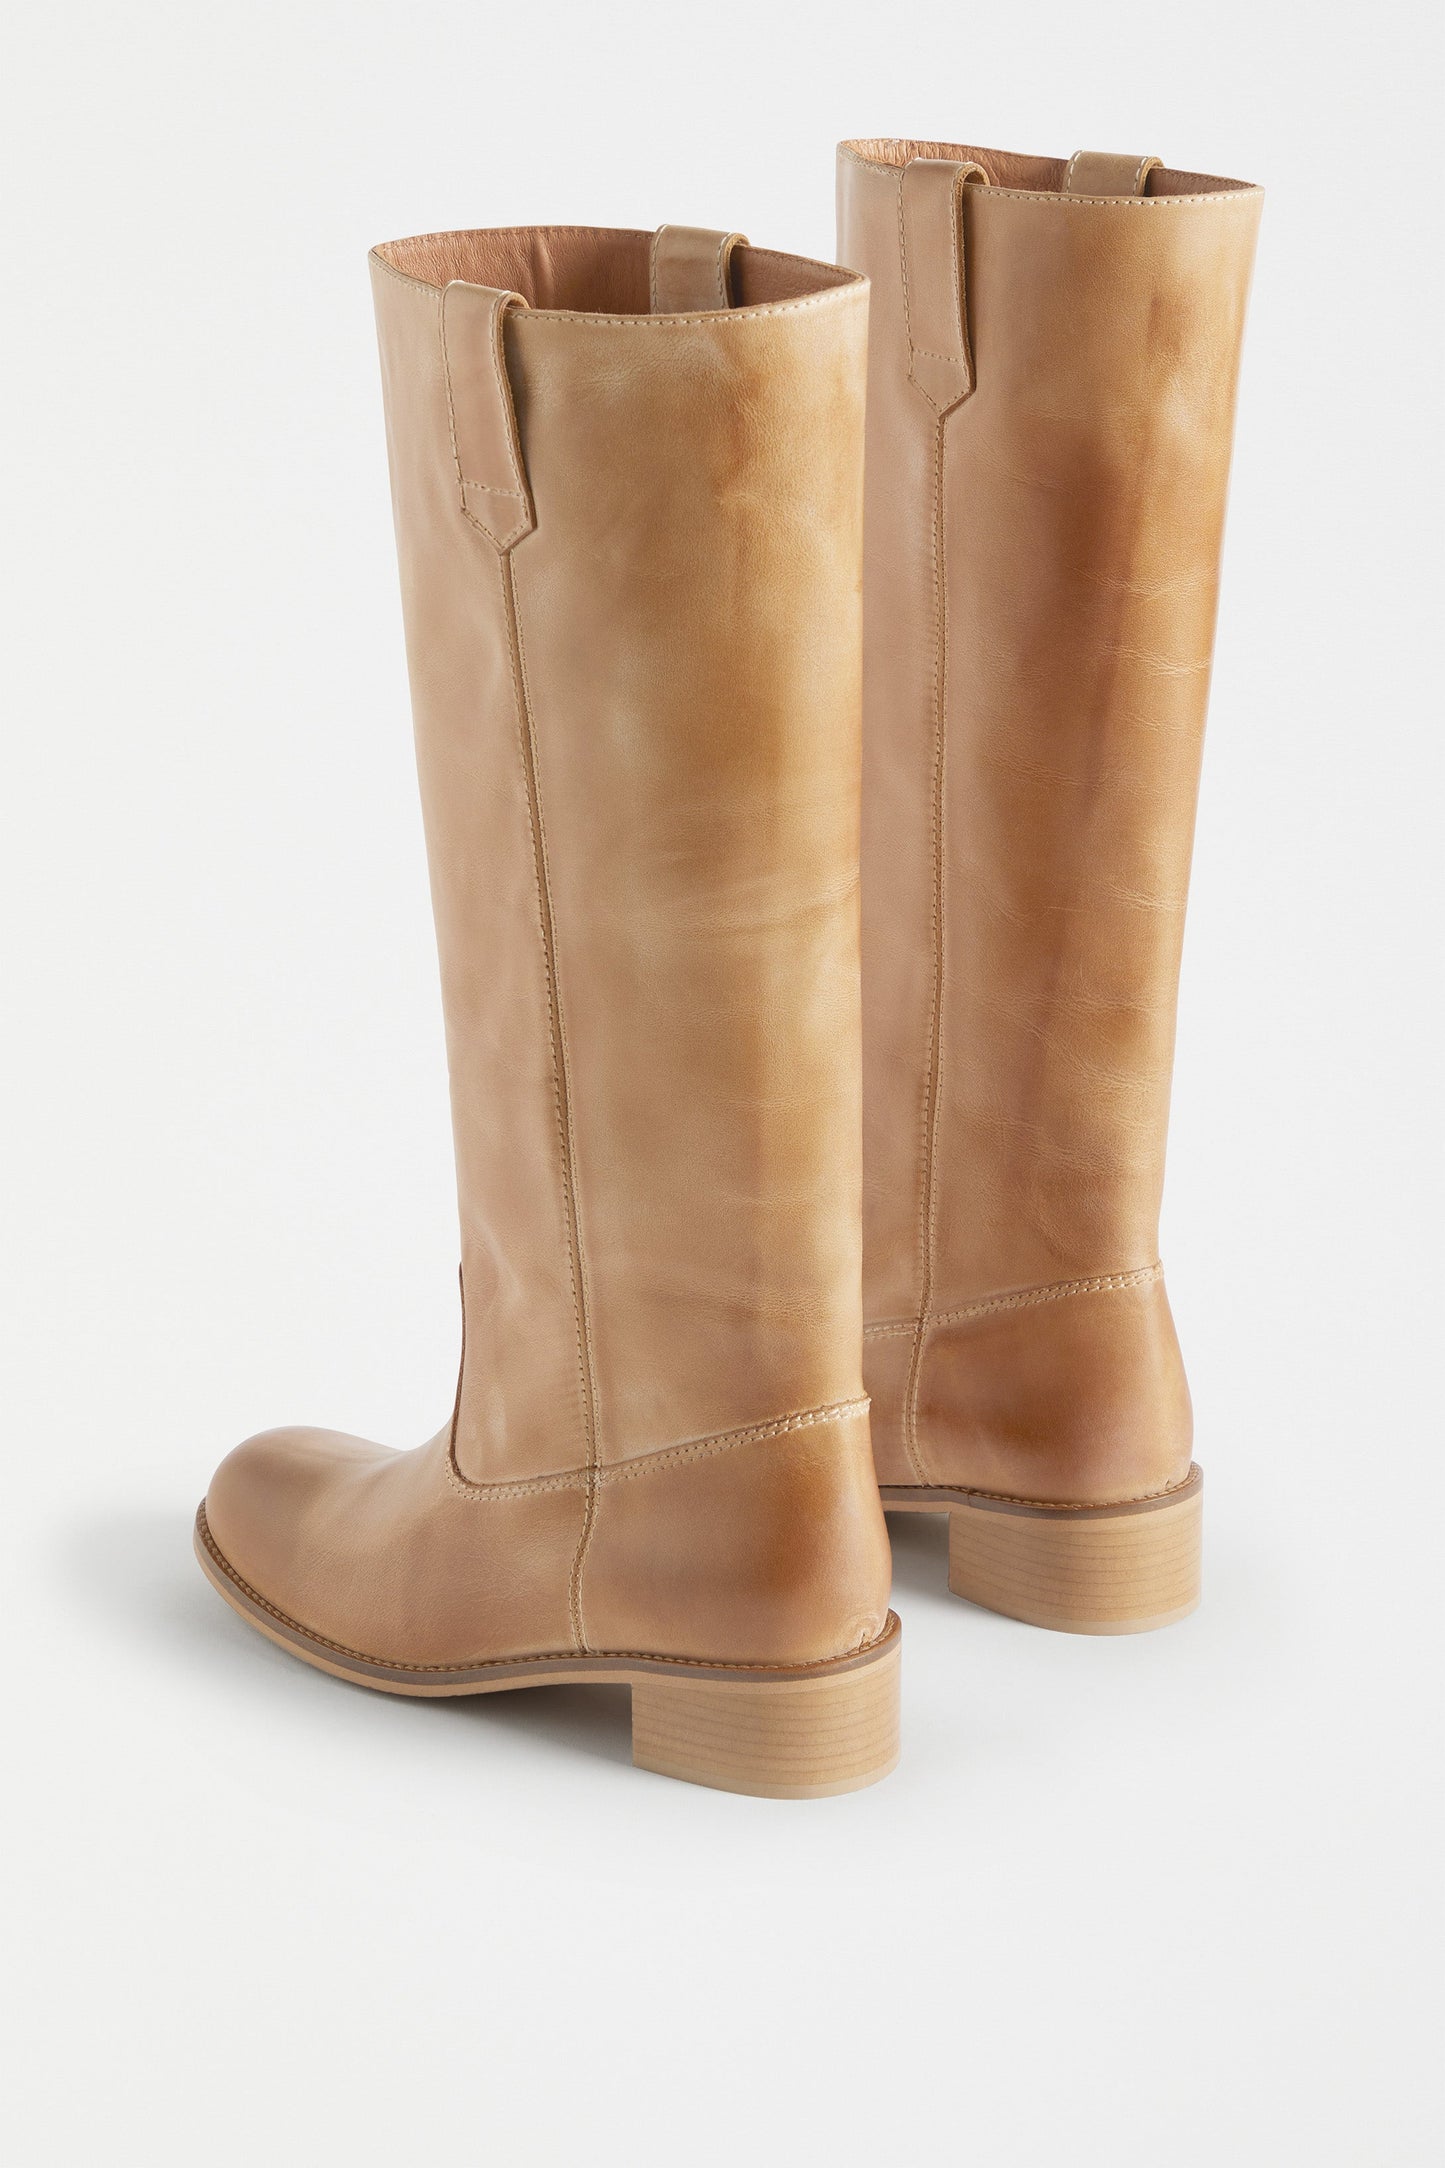 Anna Escovado Natural Worn Look Knee High Leather Boots Angled Back | TAN